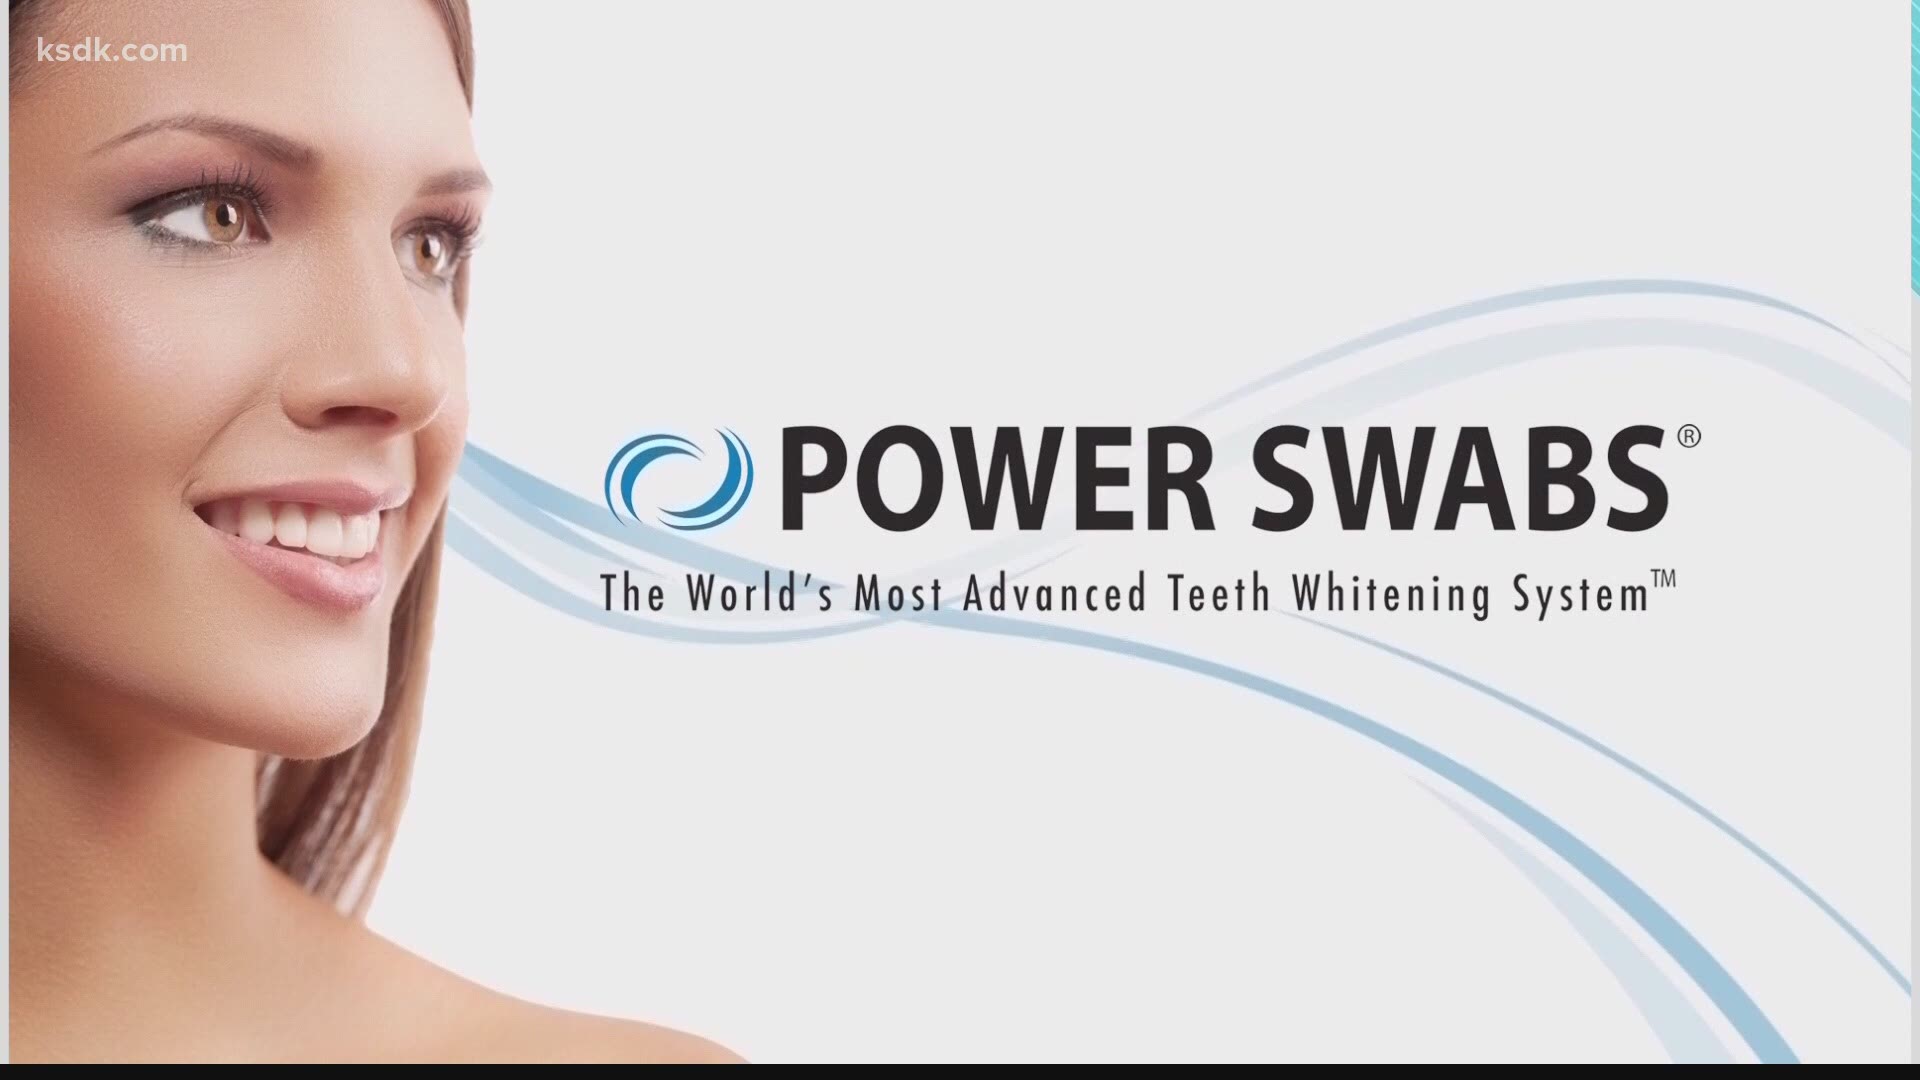 Power Swabs make it easy to look younger, healthier, and to feel more confident.